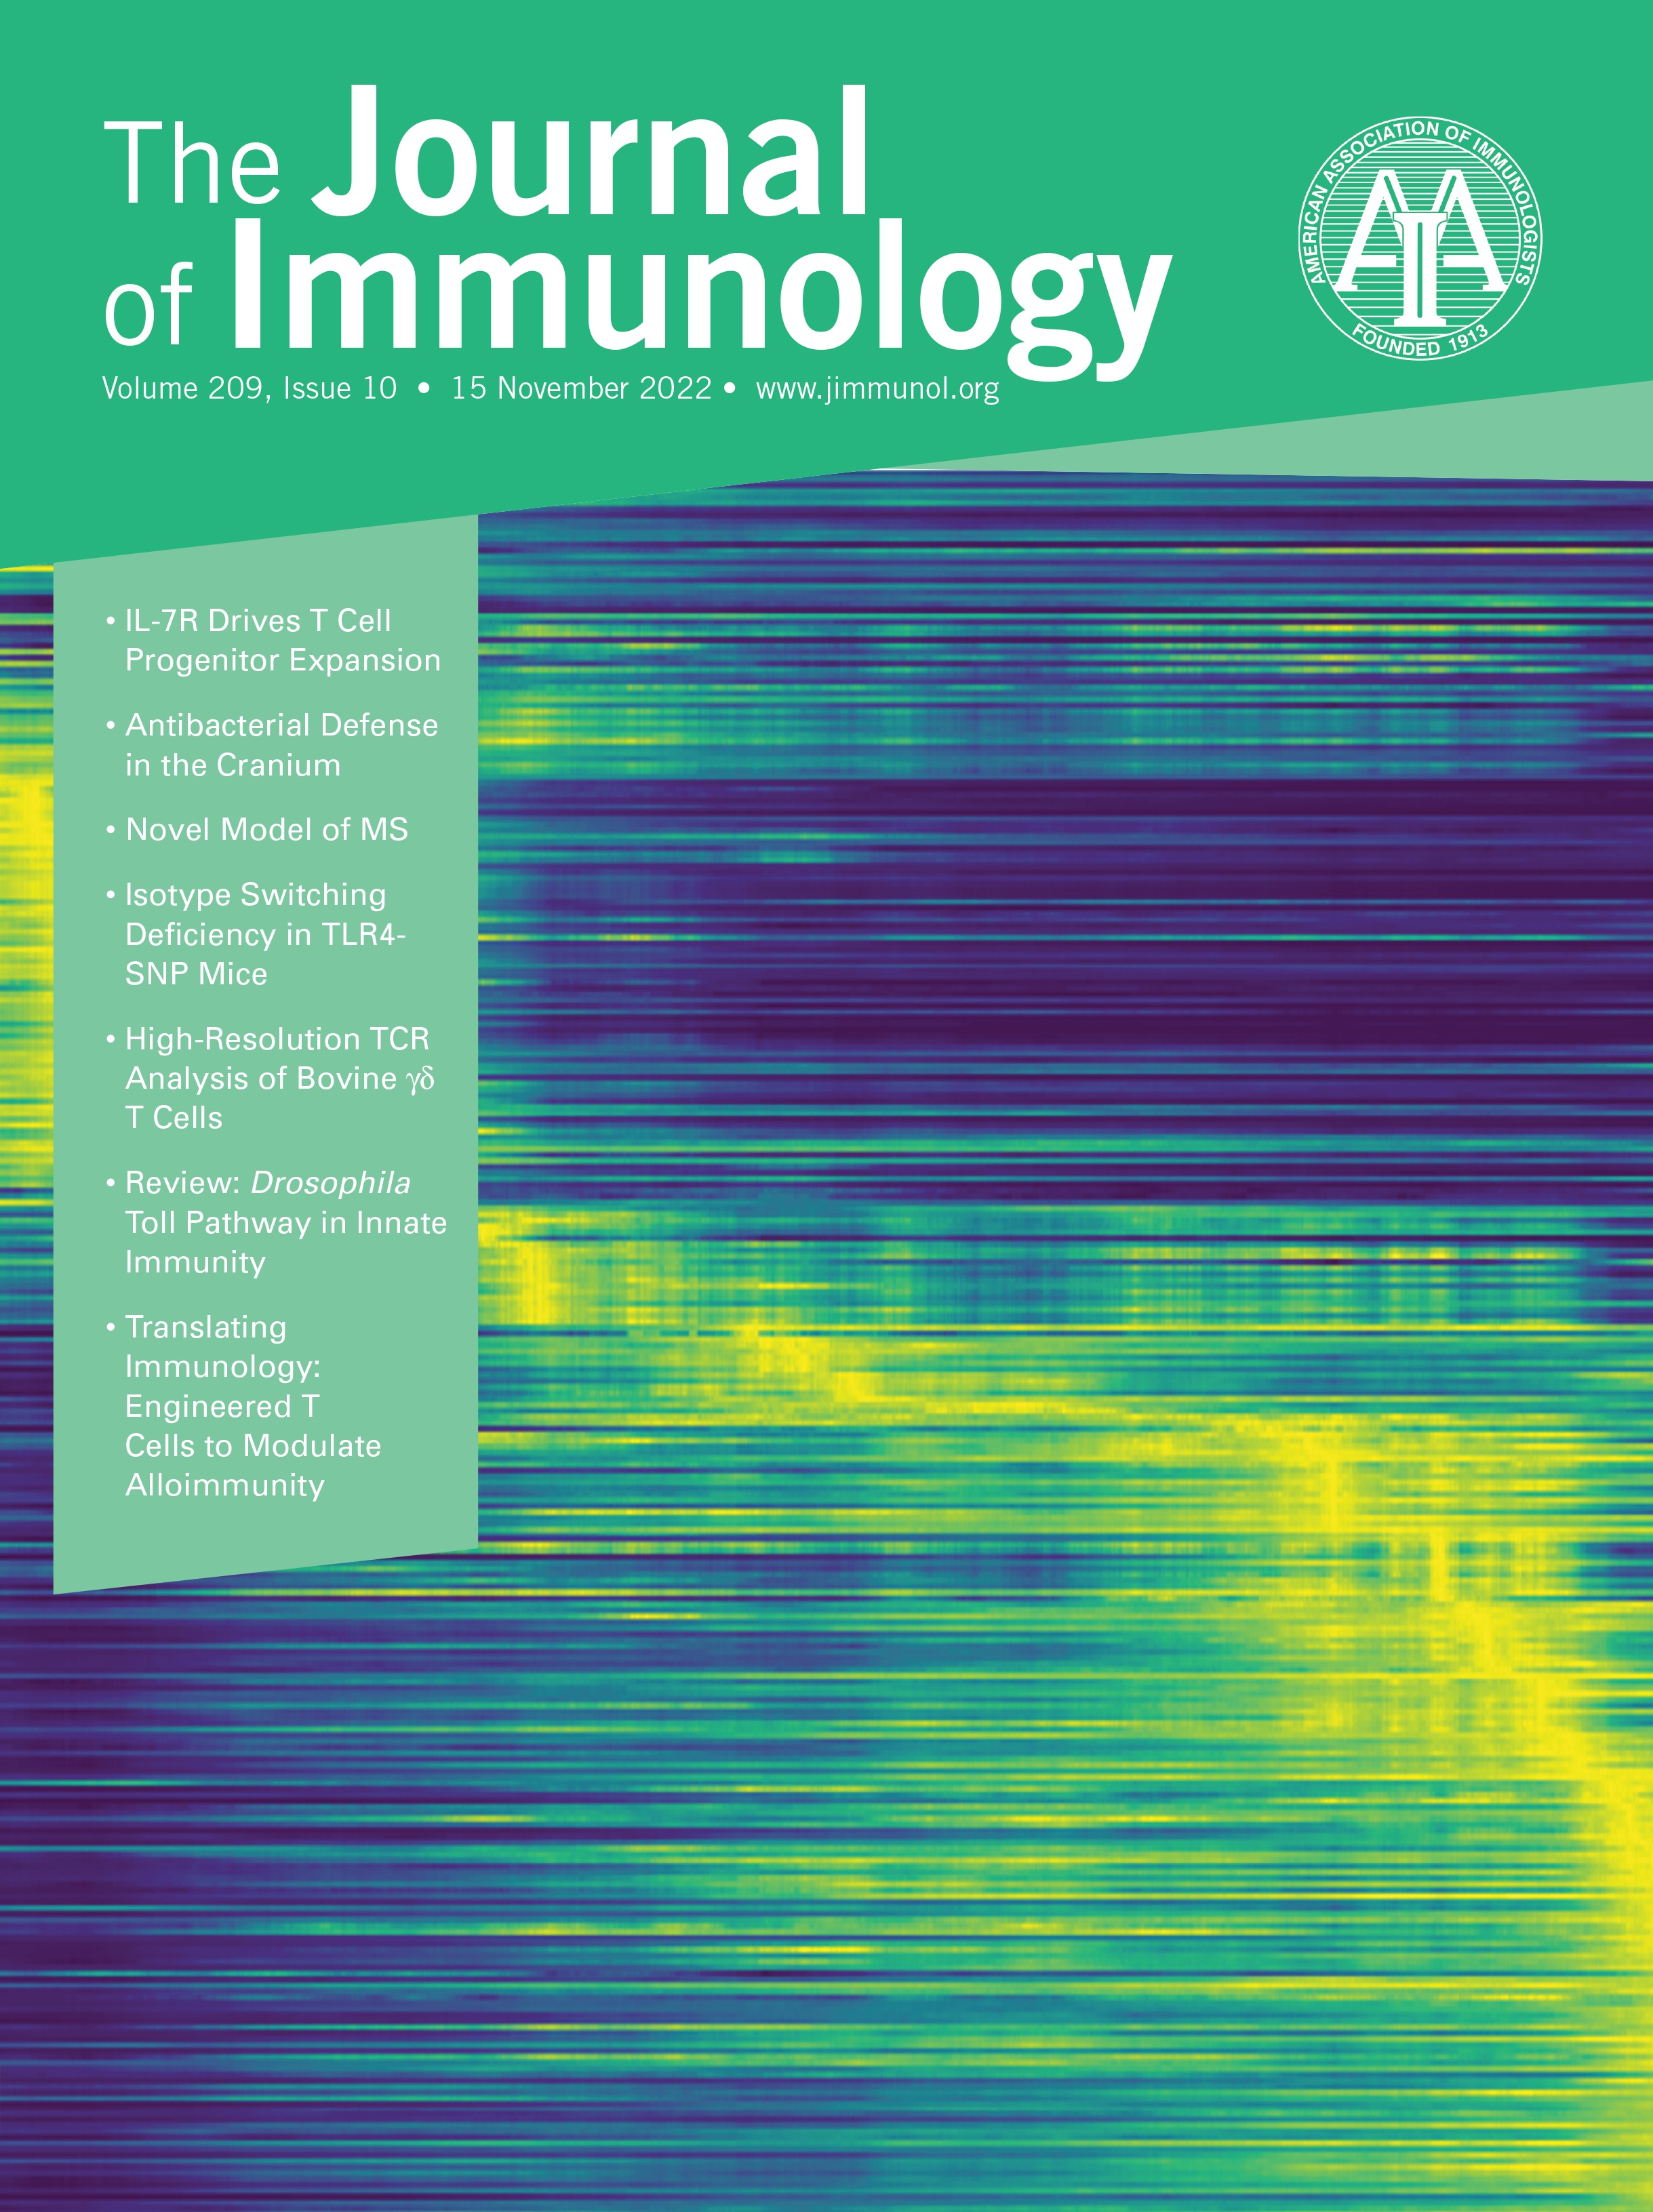 Cytomegalovirus Seropositivity in Older Adults Changes the T Cell Repertoire but Does Not Prevent Antibody or Cellular Responses to SARS-CoV-2 Vaccination [CLINICAL AND HUMAN IMMUNOLOGY]